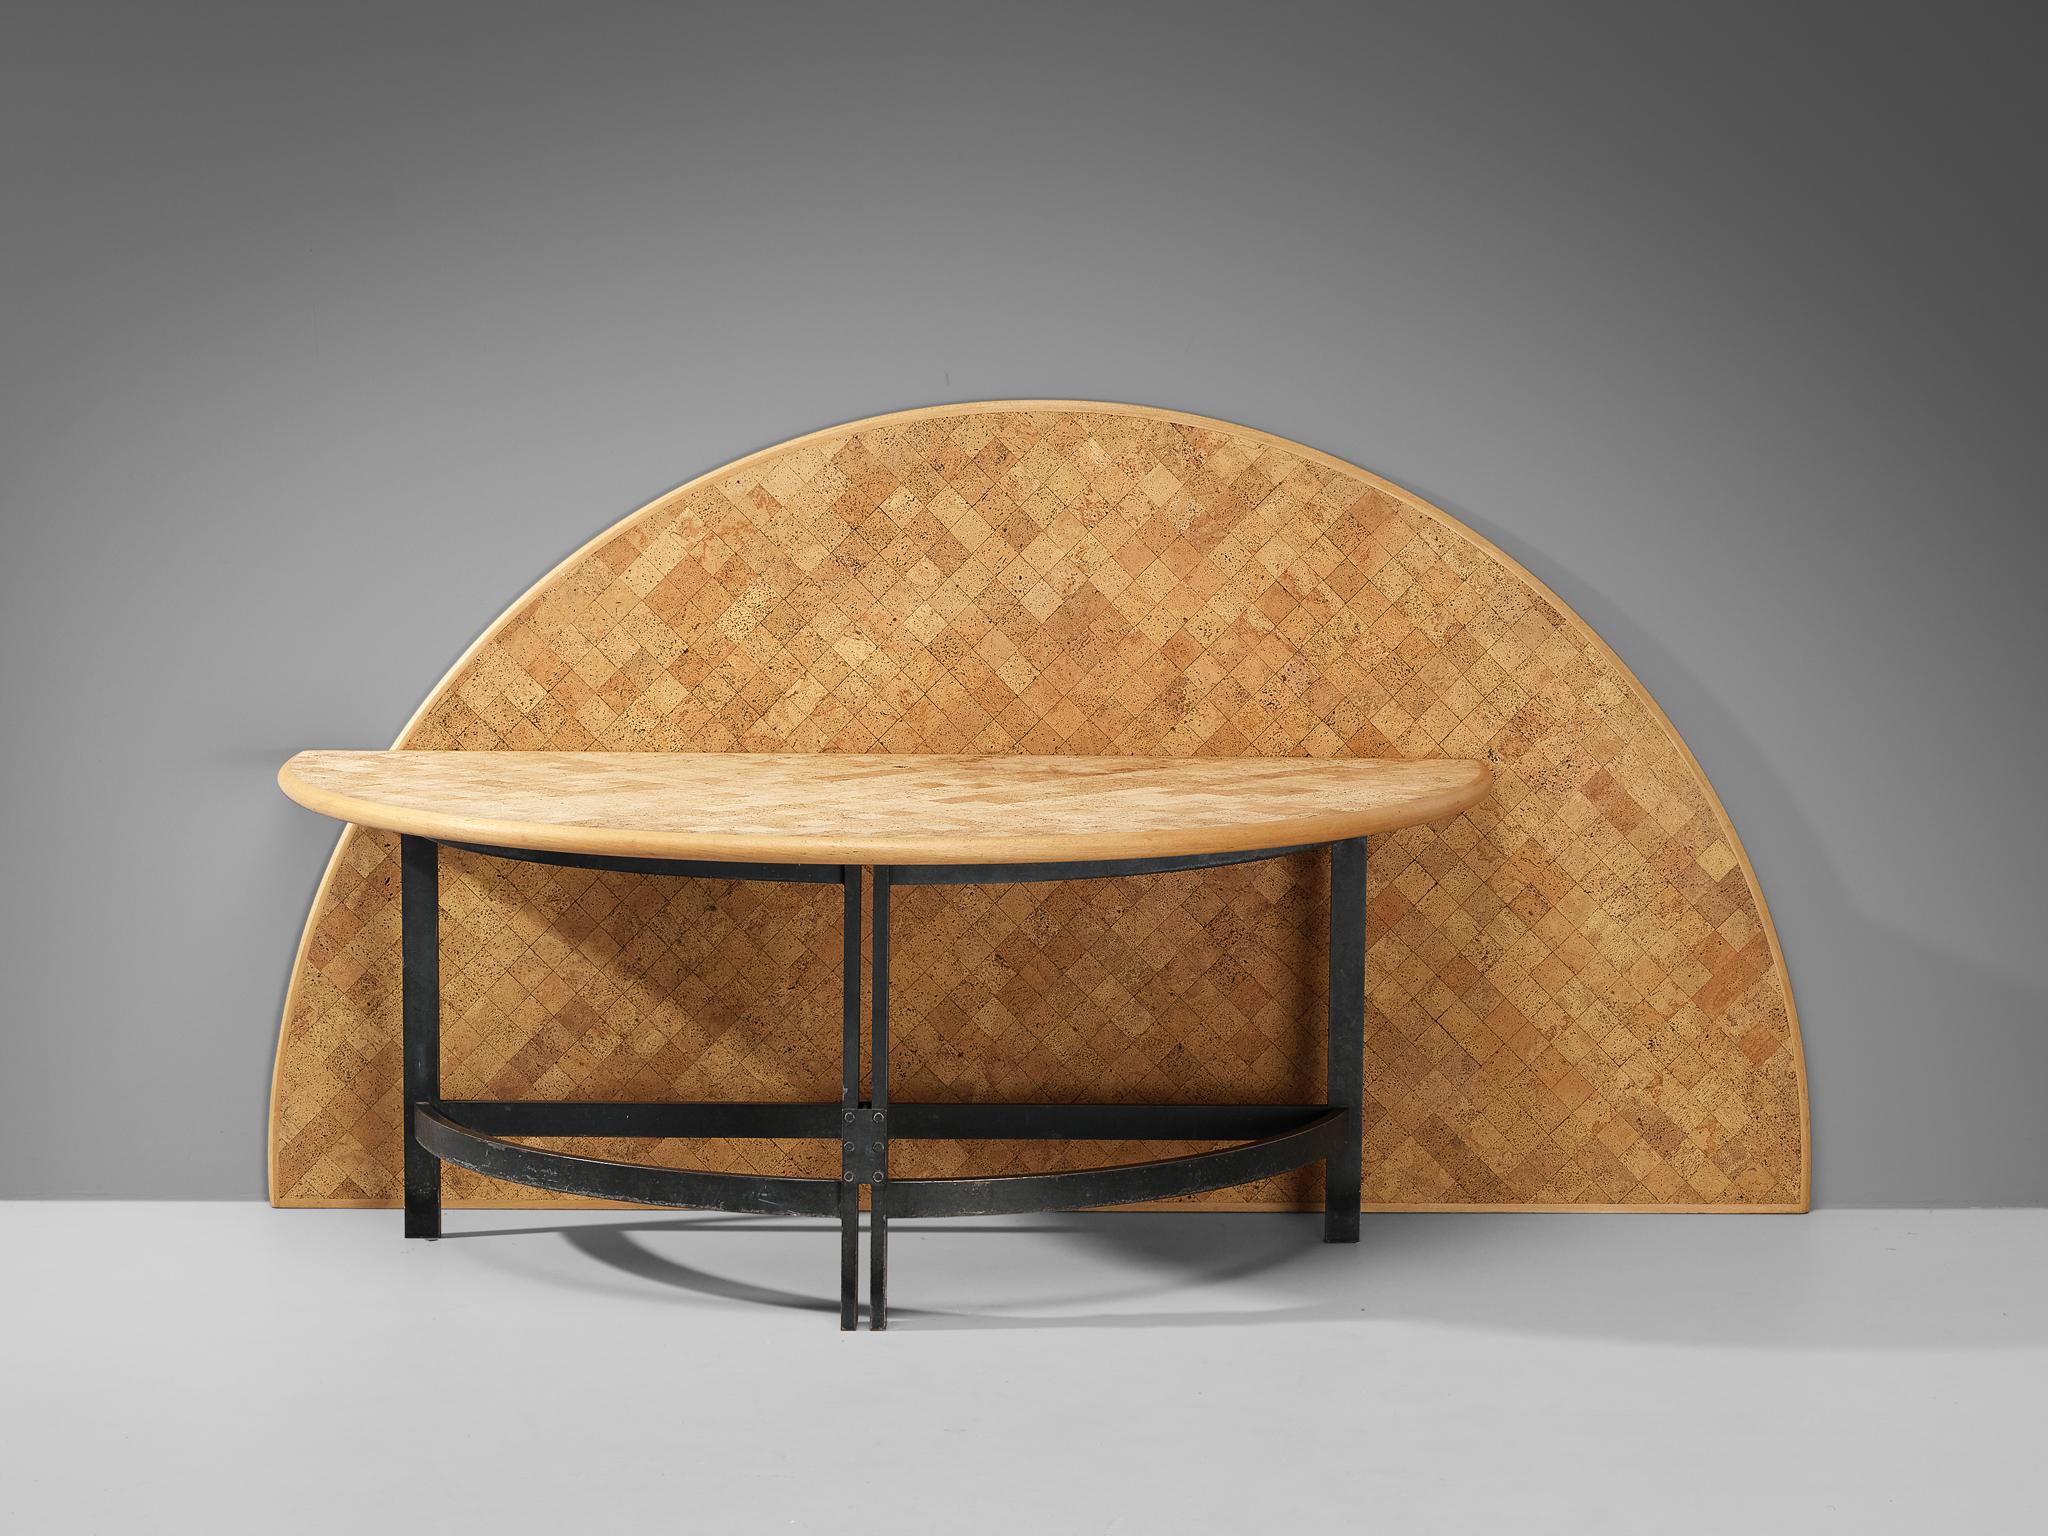 Poul Kjærholm and Nils Fagerholt for PP Møbler, side table with two tabletops, steel, cork, beech, Denmark, 1978. 

This semi-circular table was designed by Poul Kjærholm for an interior for his close friend and architect Nils Fagerholt. It was